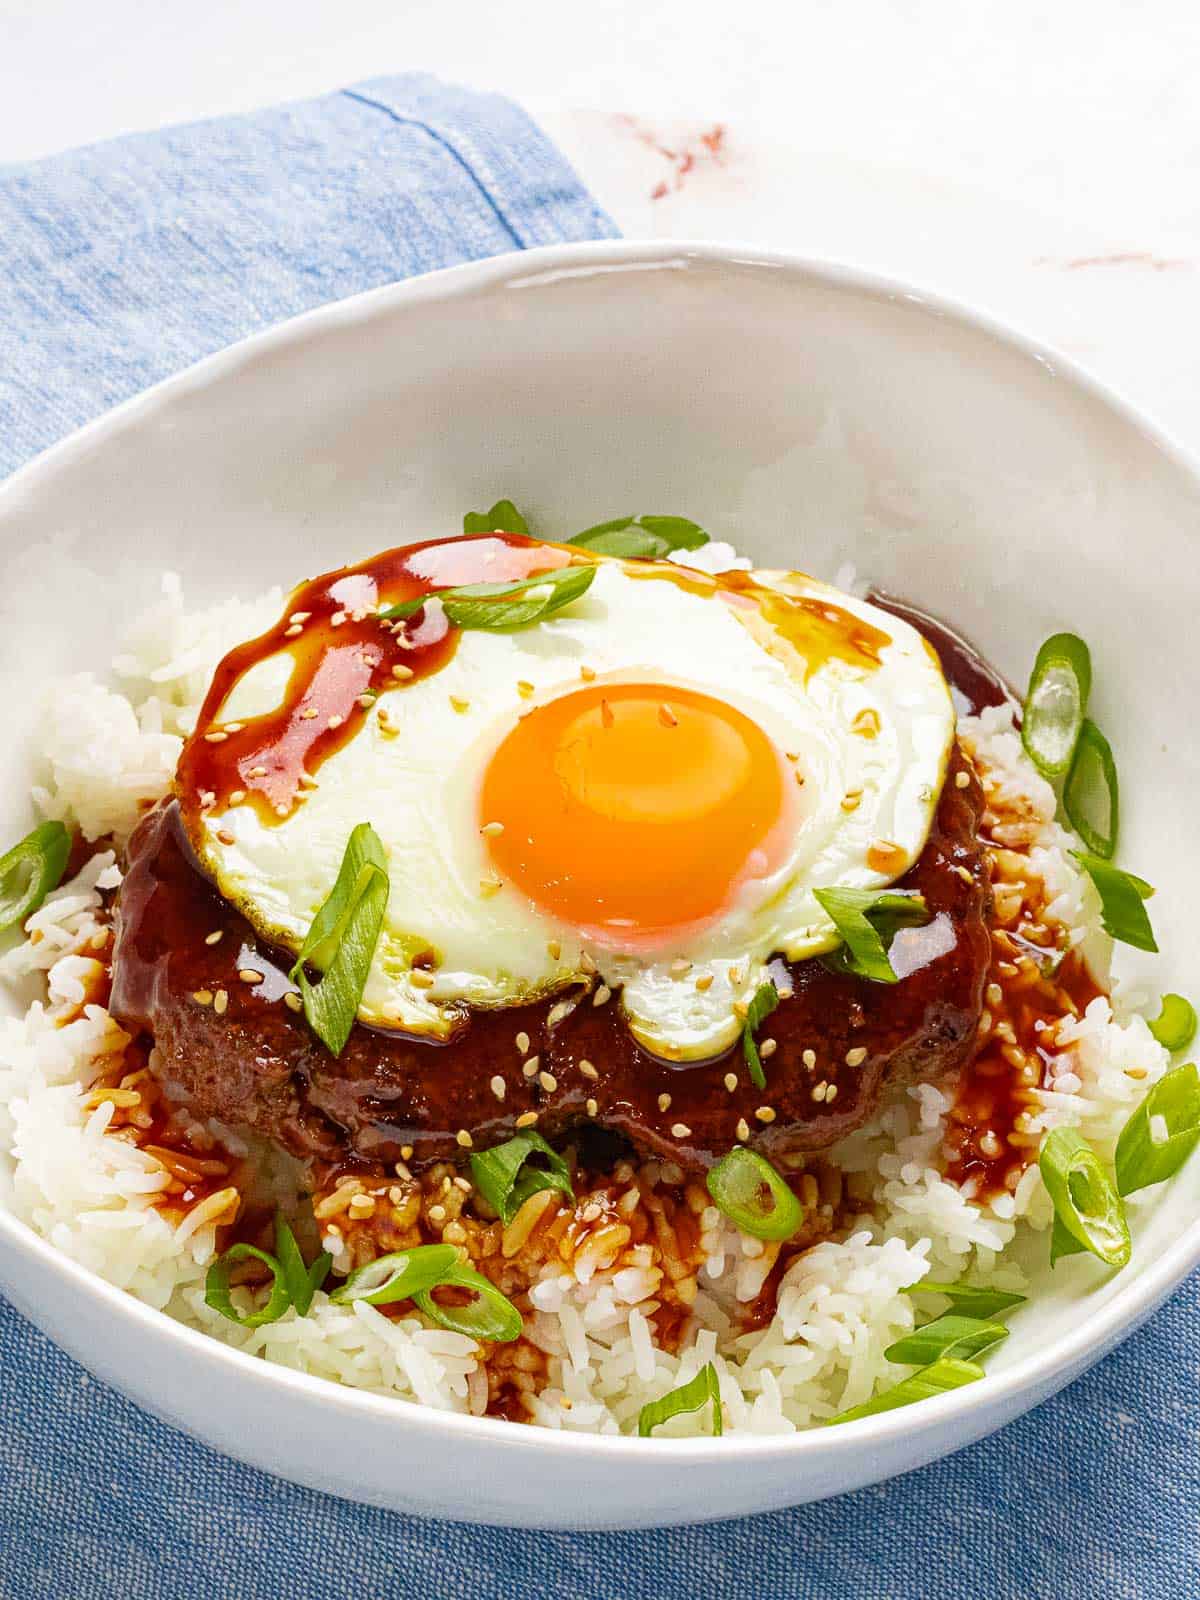 Hawaiian loco moco with a burger, gravy, white rice, and a sunny side up egg in a white bowl.